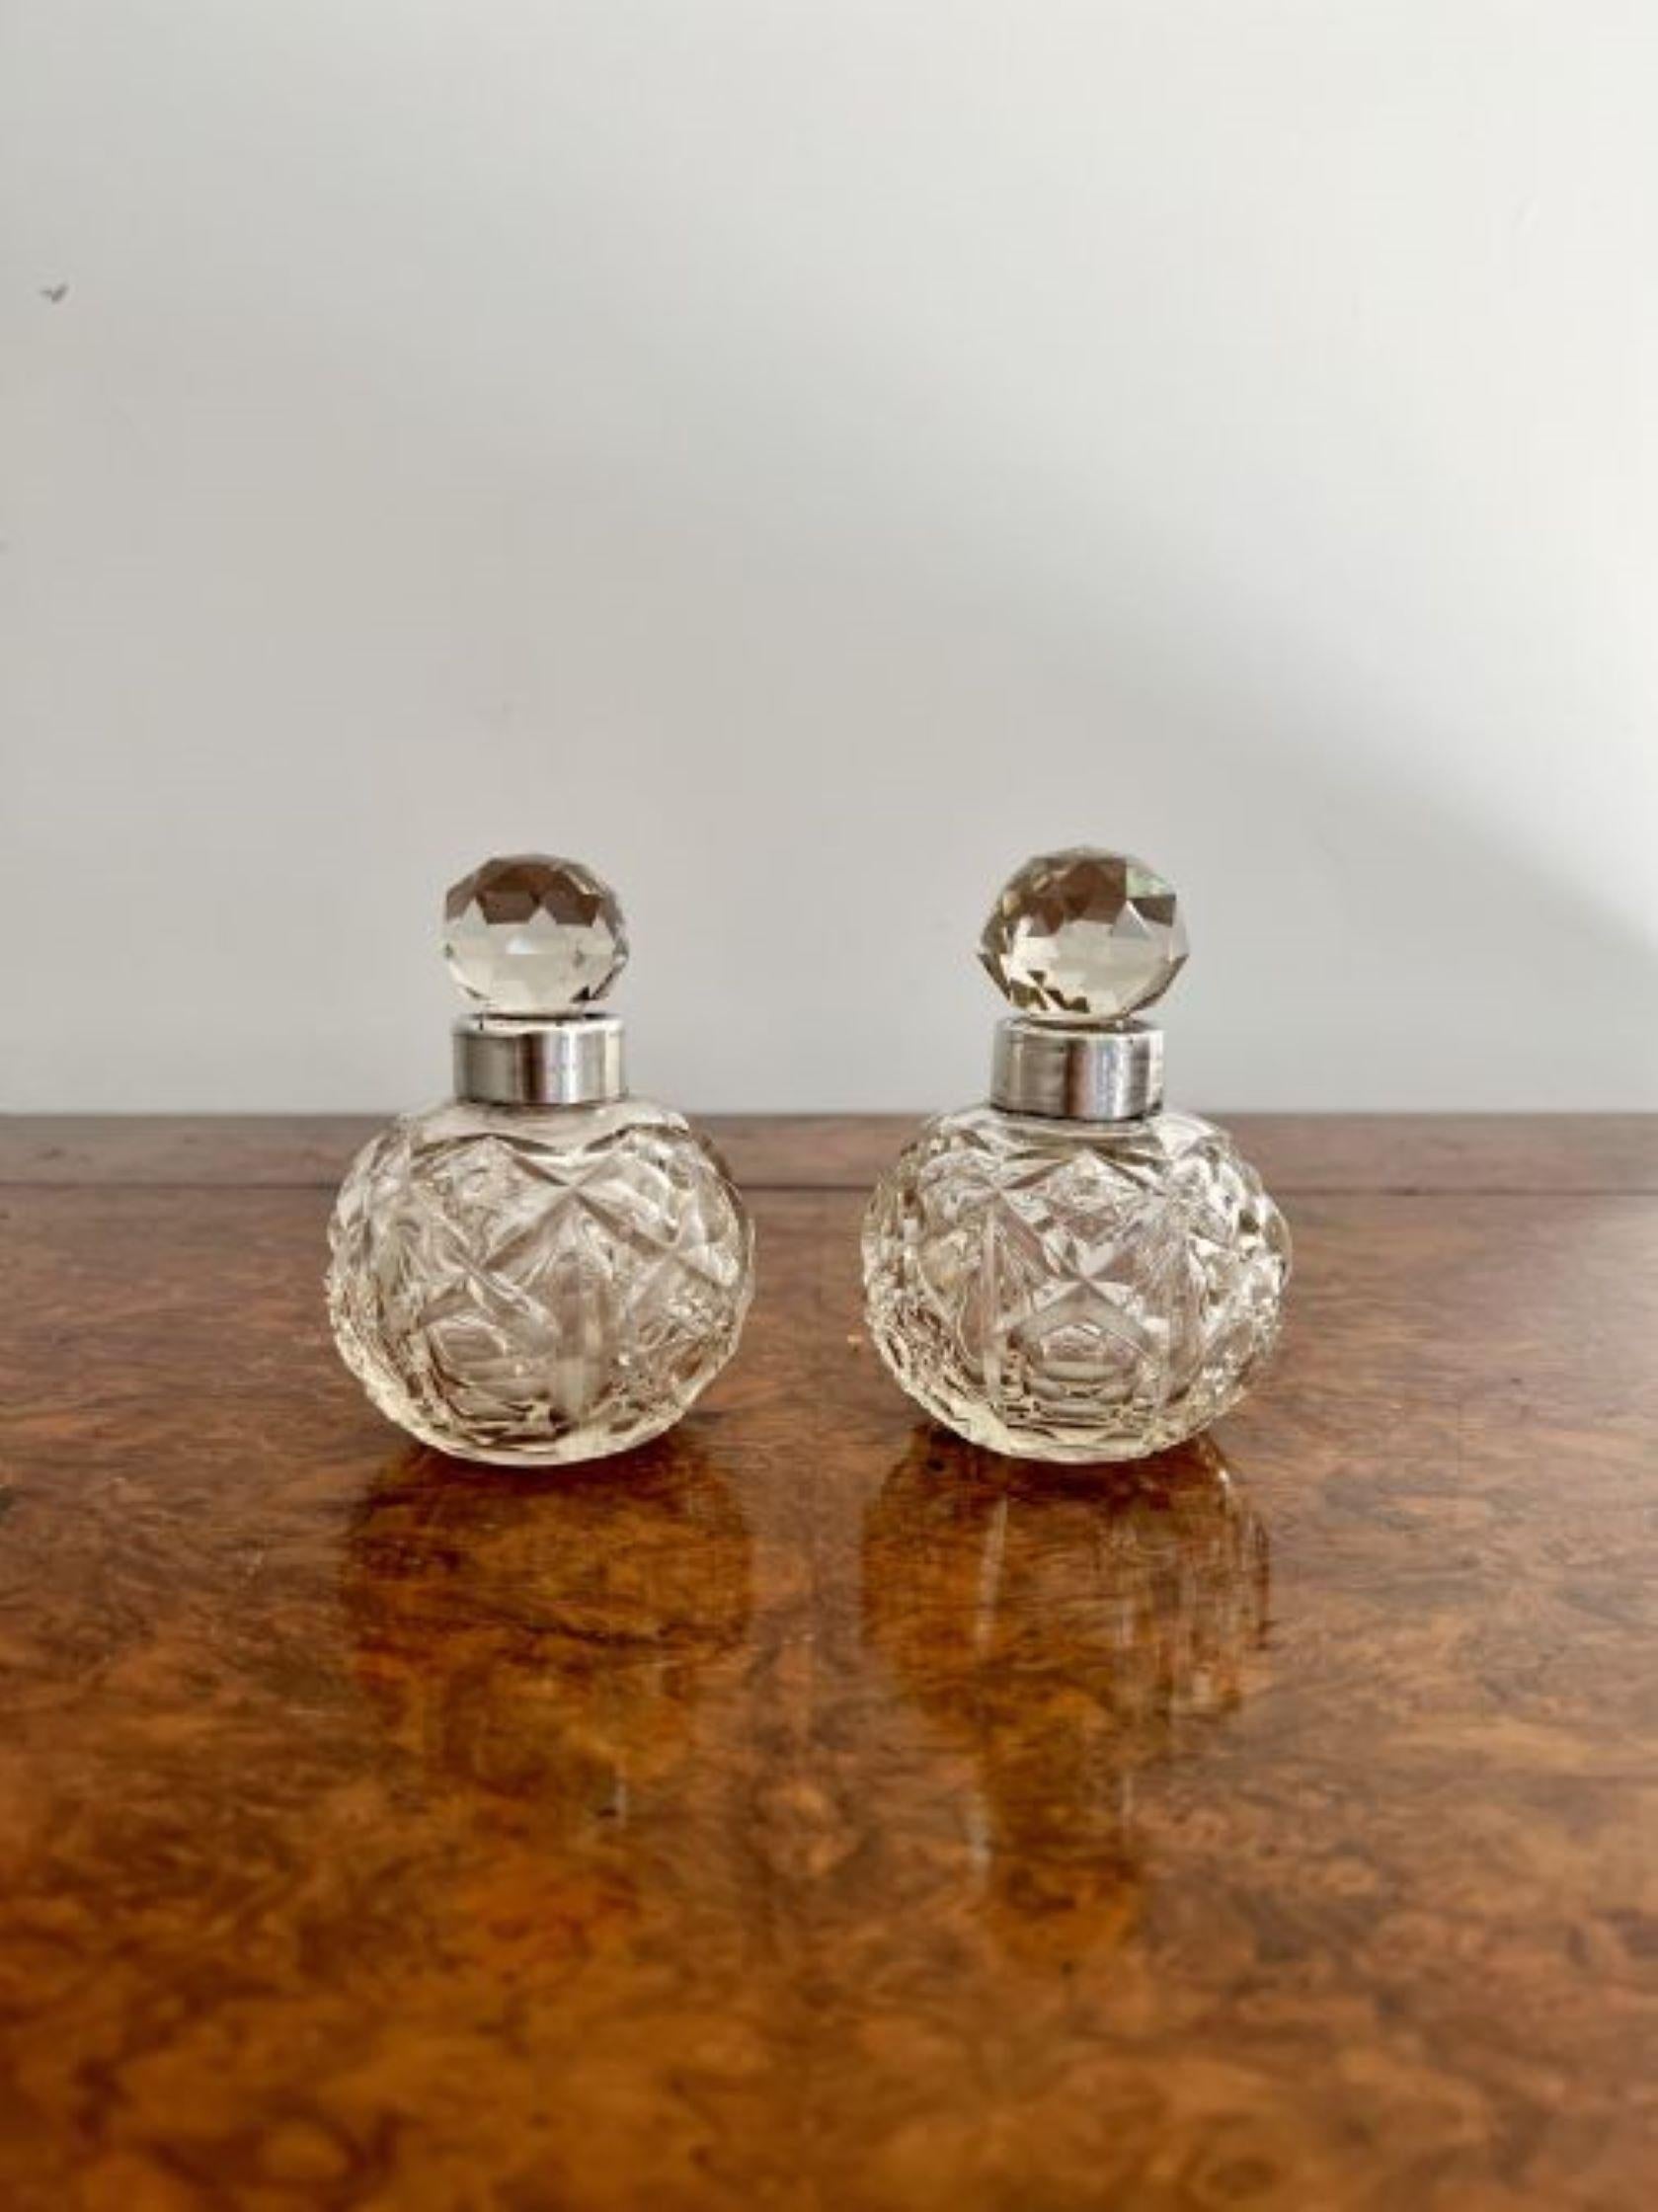 Quality pair of antique Edwardian silver collar & cut glass scent bottles having a lovely quality pair of scent bottles, with a cut glass detailed body, silver collar and the original cut glass stopper. 